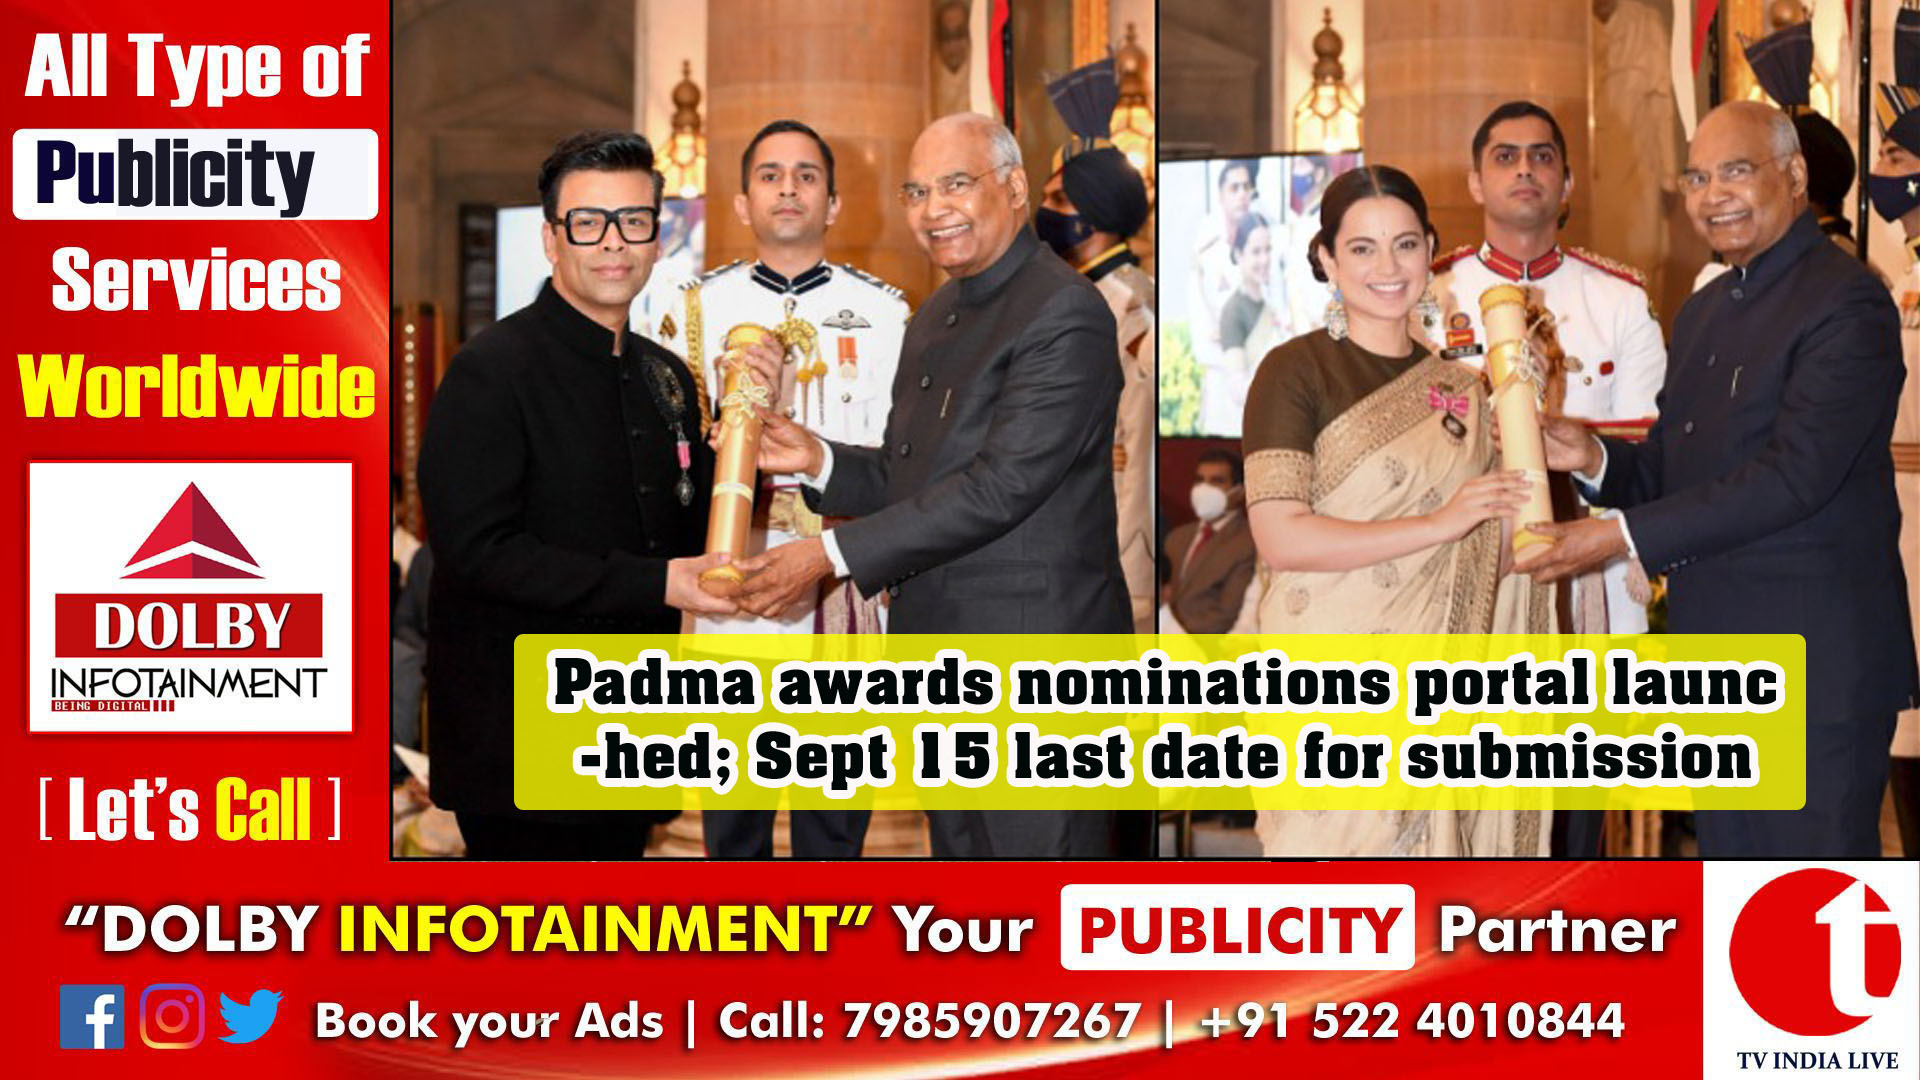 Padma awards nominations portal launched; Sept 15 last date for submission